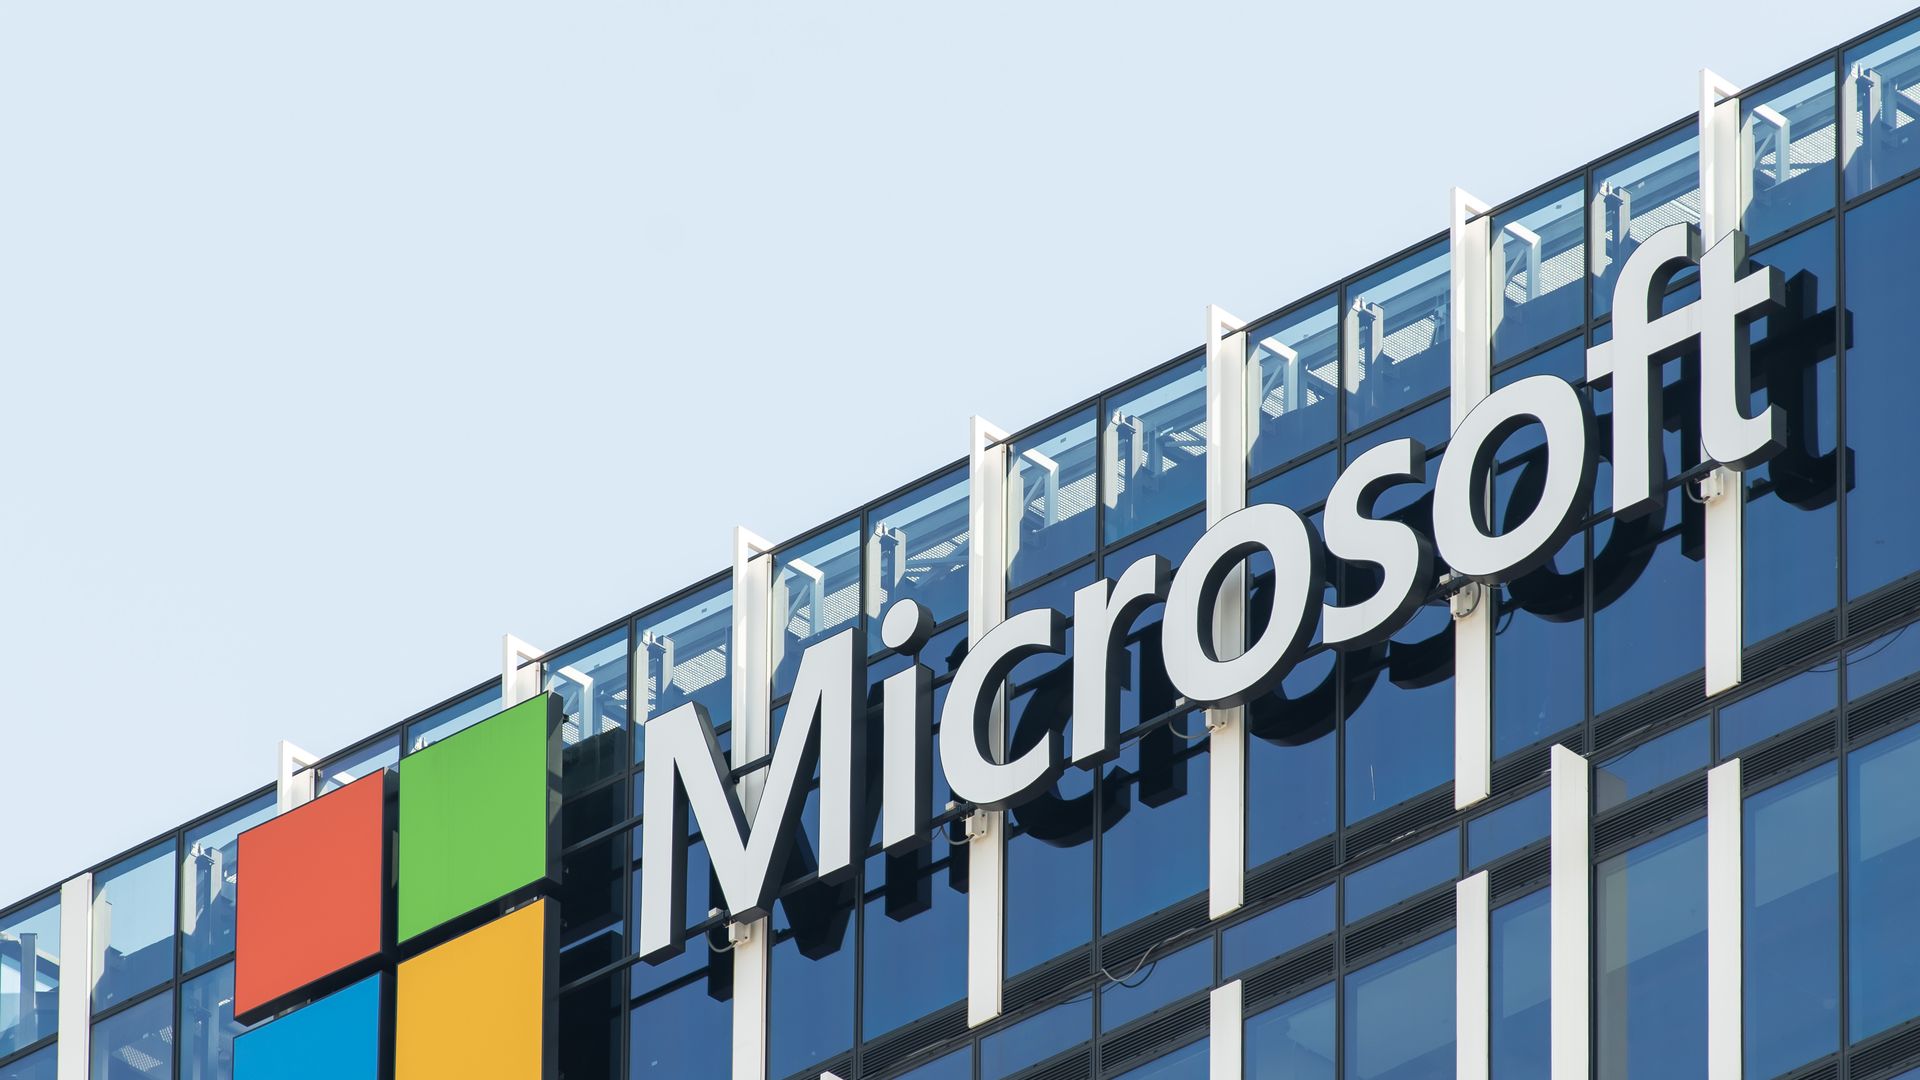 Image of the Microsoft logo on the side of a building